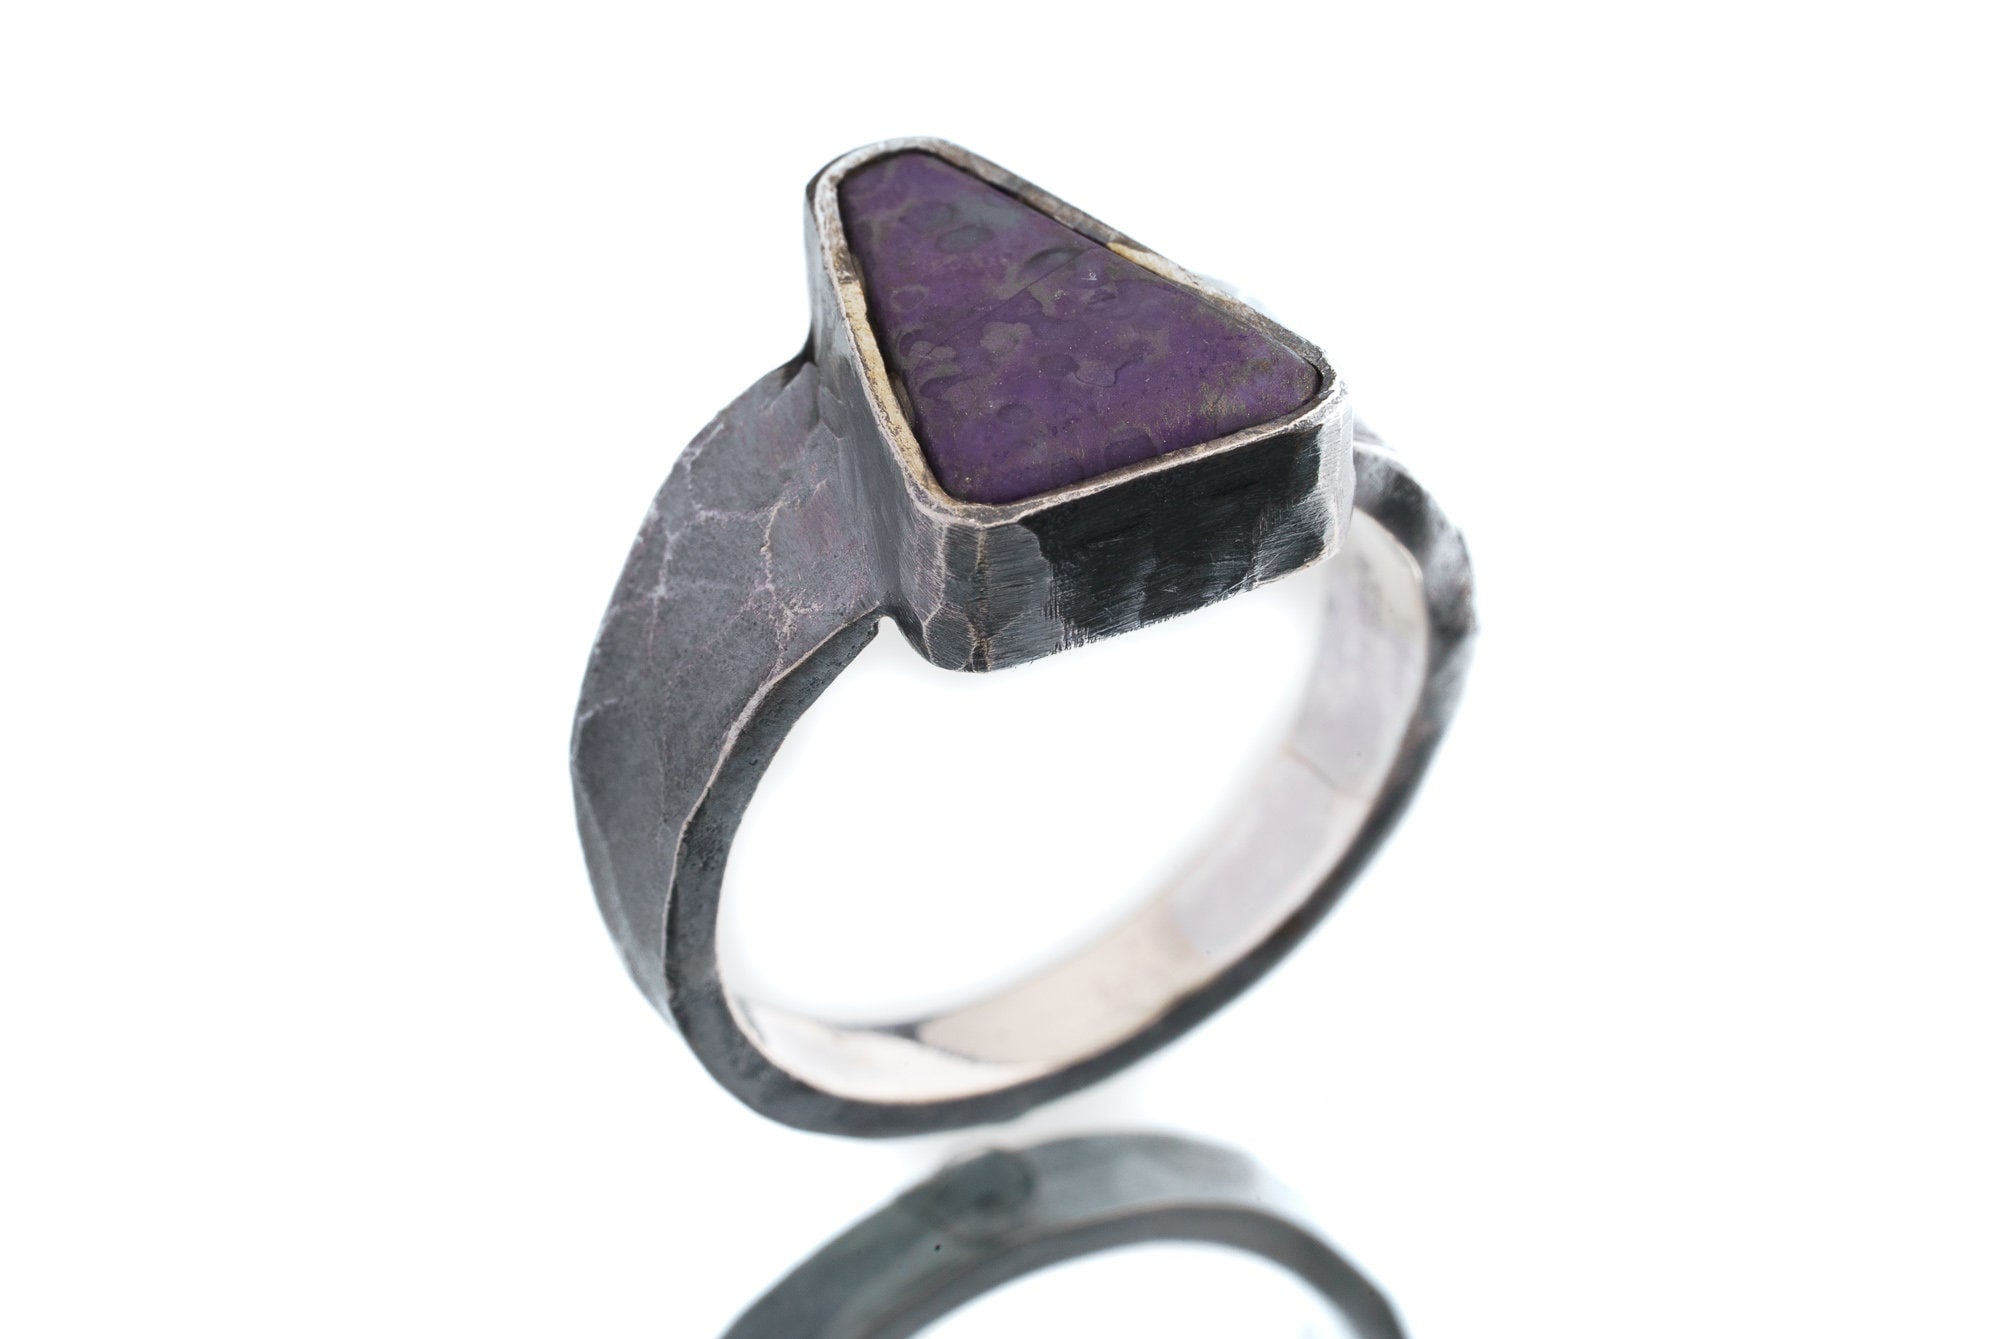 Triangular AAA Sugilite Cabochon - Men's / Unisex Large Crystal Ring - Size 7 1/2 US - 925 Sterling Silver - Hammer Textured & Oxidised